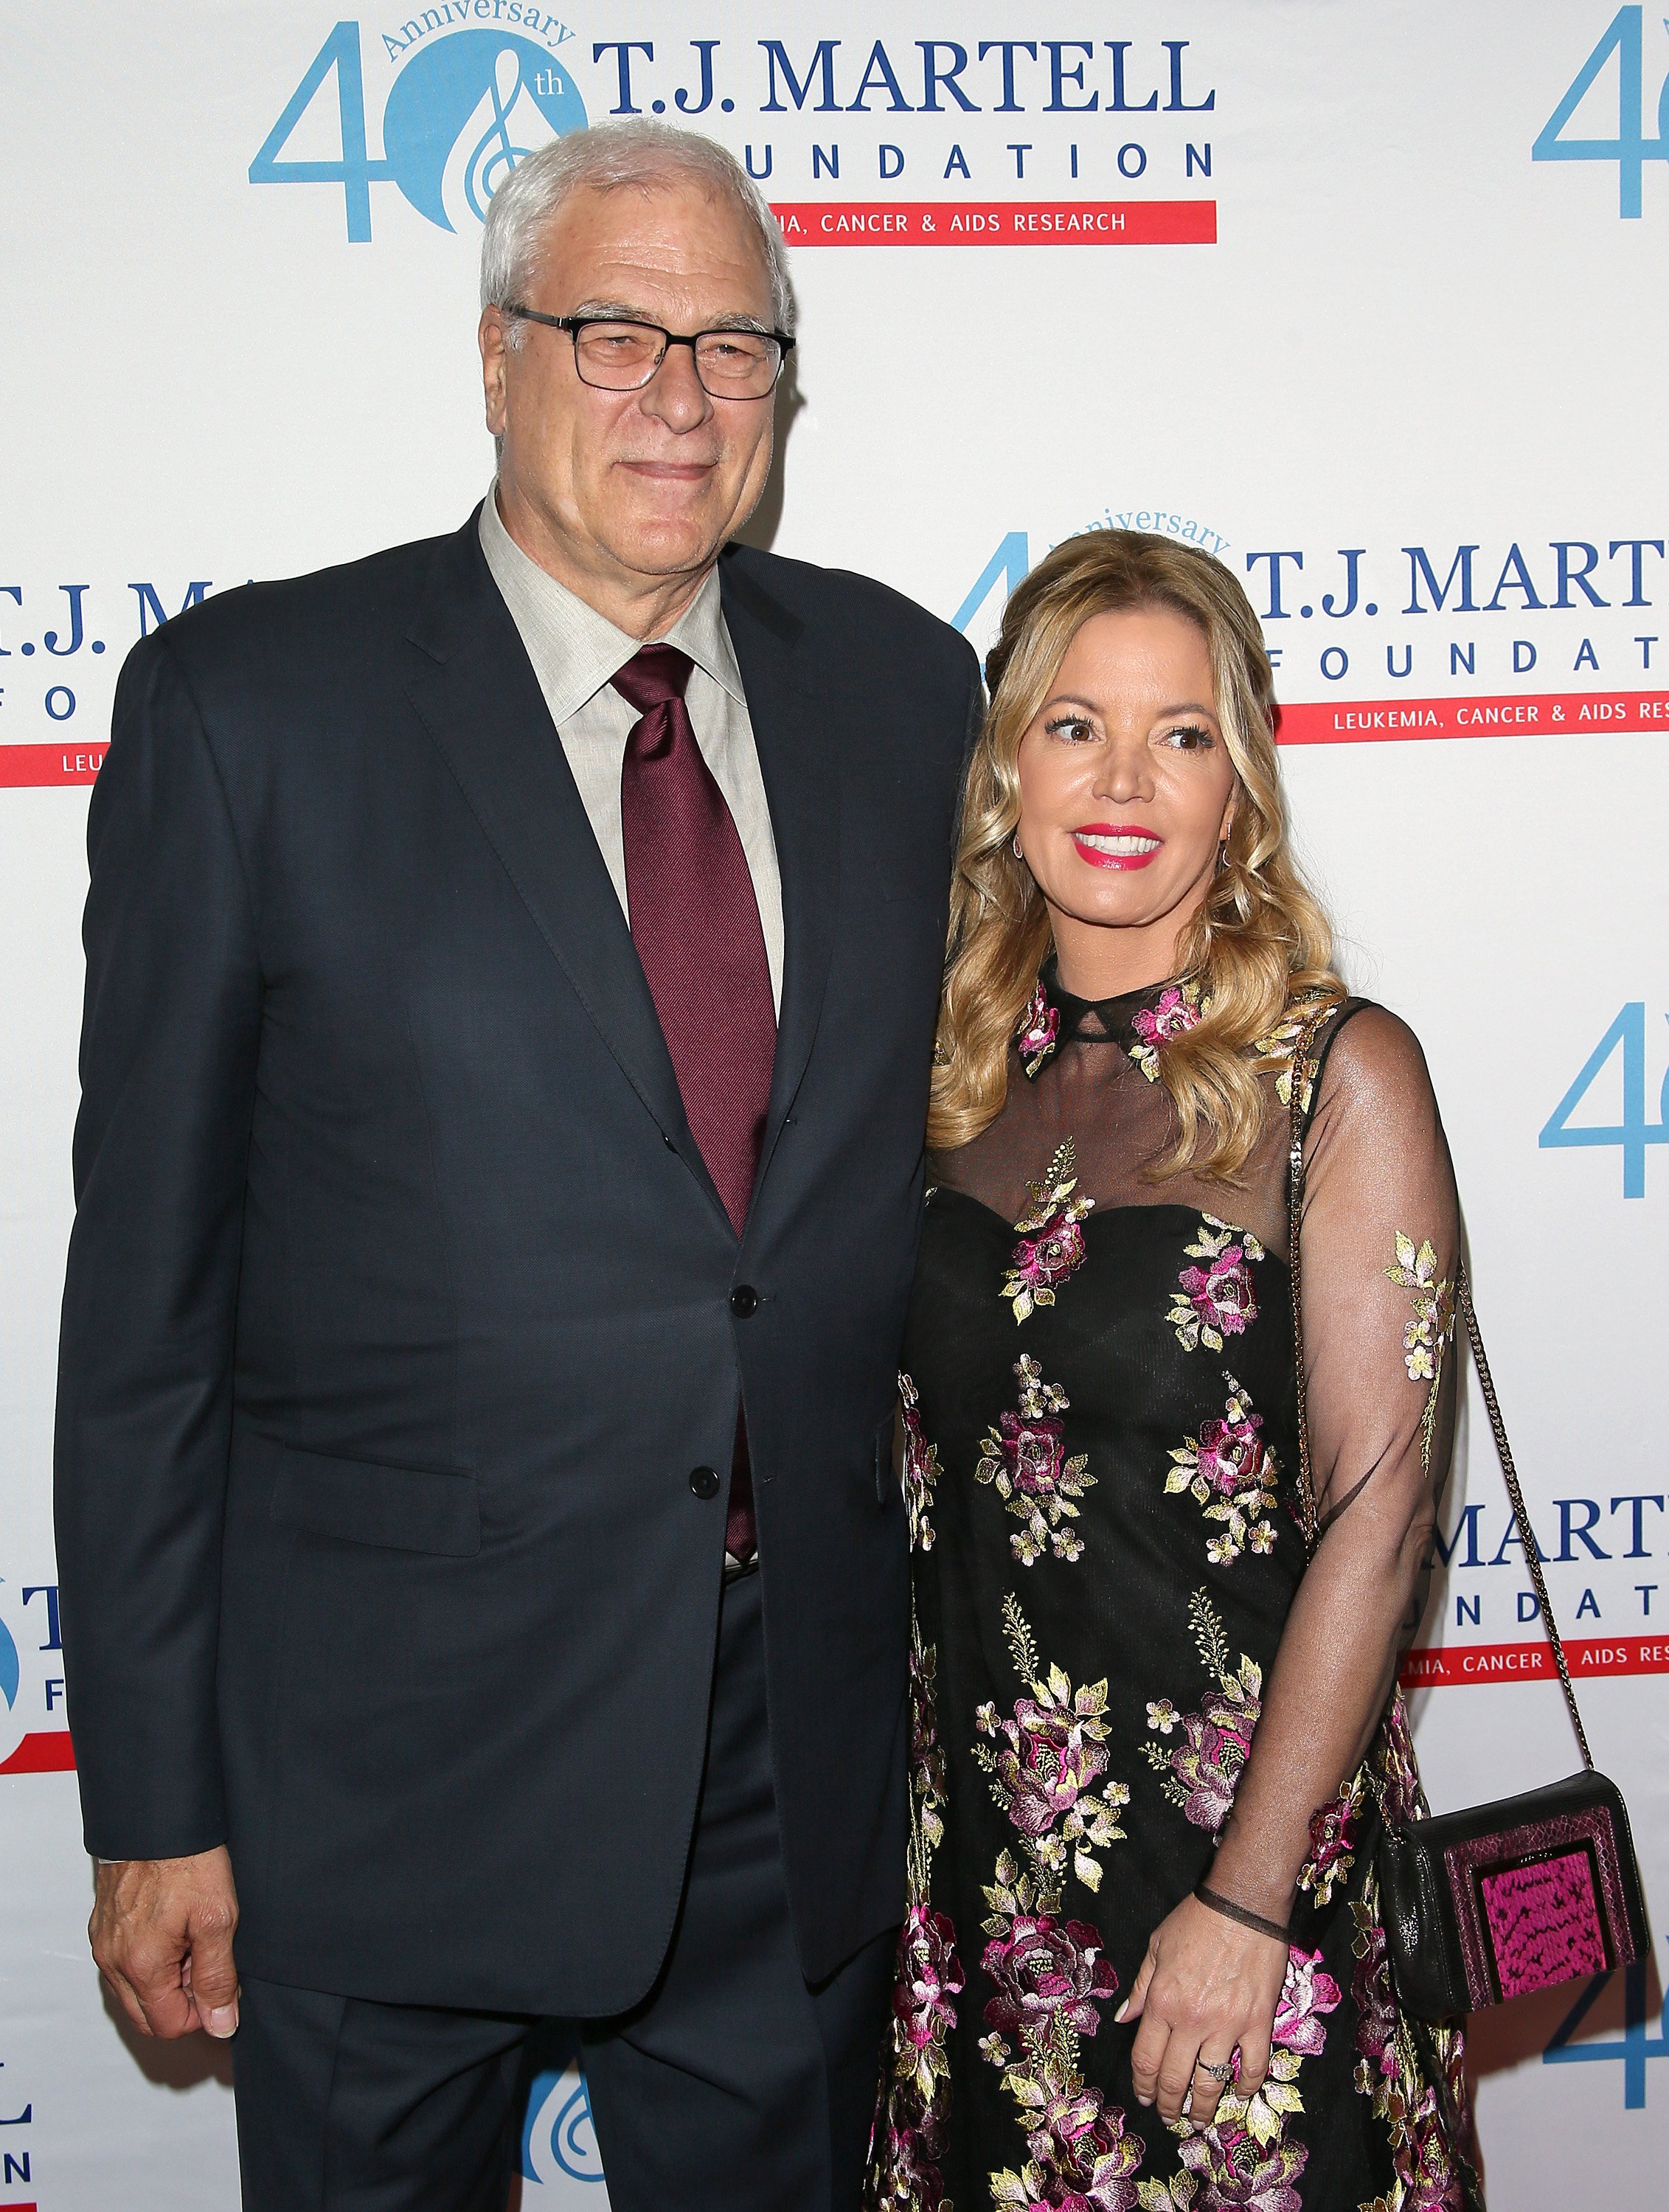 Phil Jackson and Jeanie Buss arrive at the T.J. Martell Foundation's Spirit of Excellence Awards held at the Beverly Wilshire Four Seasons Hotel on September 1, 2015 | Photo: Getty Images